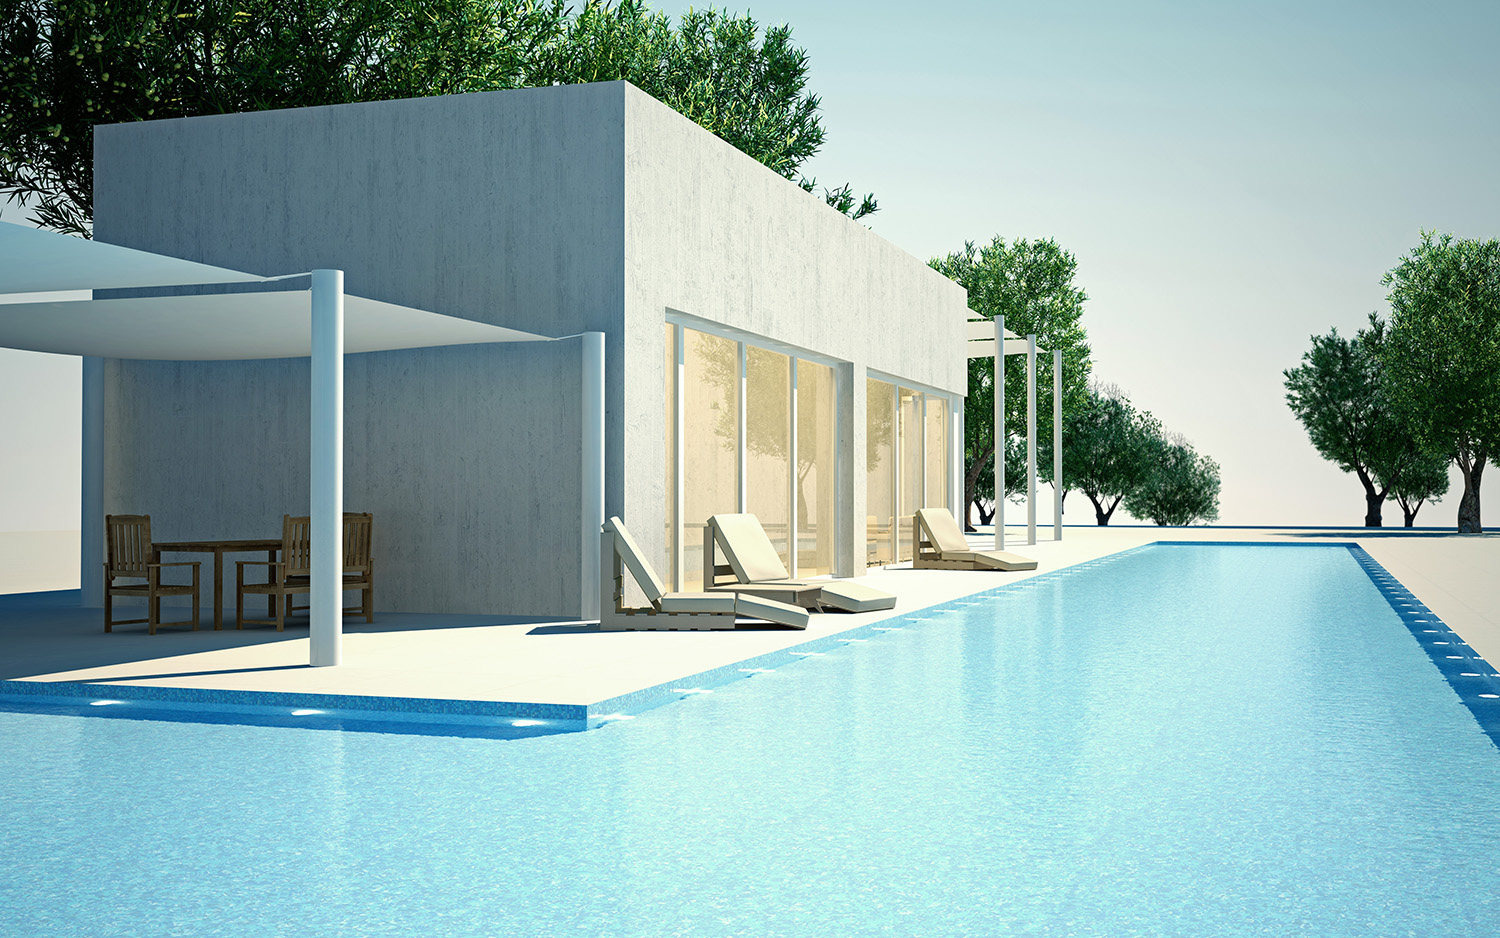 Alicante Architectural Studio: construction of a pool in chalets or single-family homes with an own plot.